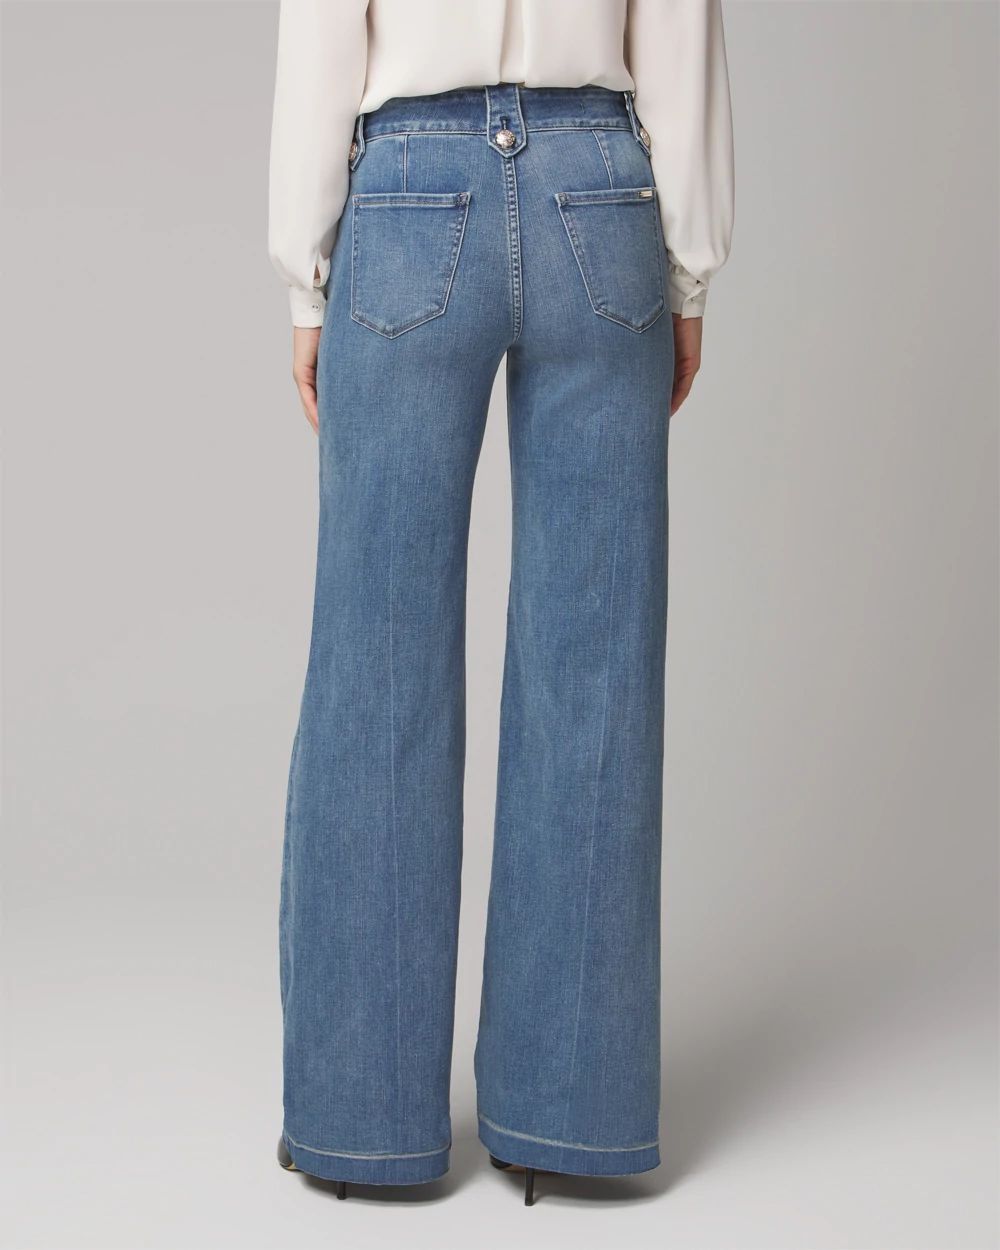 Kmart $25 high-waisted 'Feel Good Jeans' cause frenzy